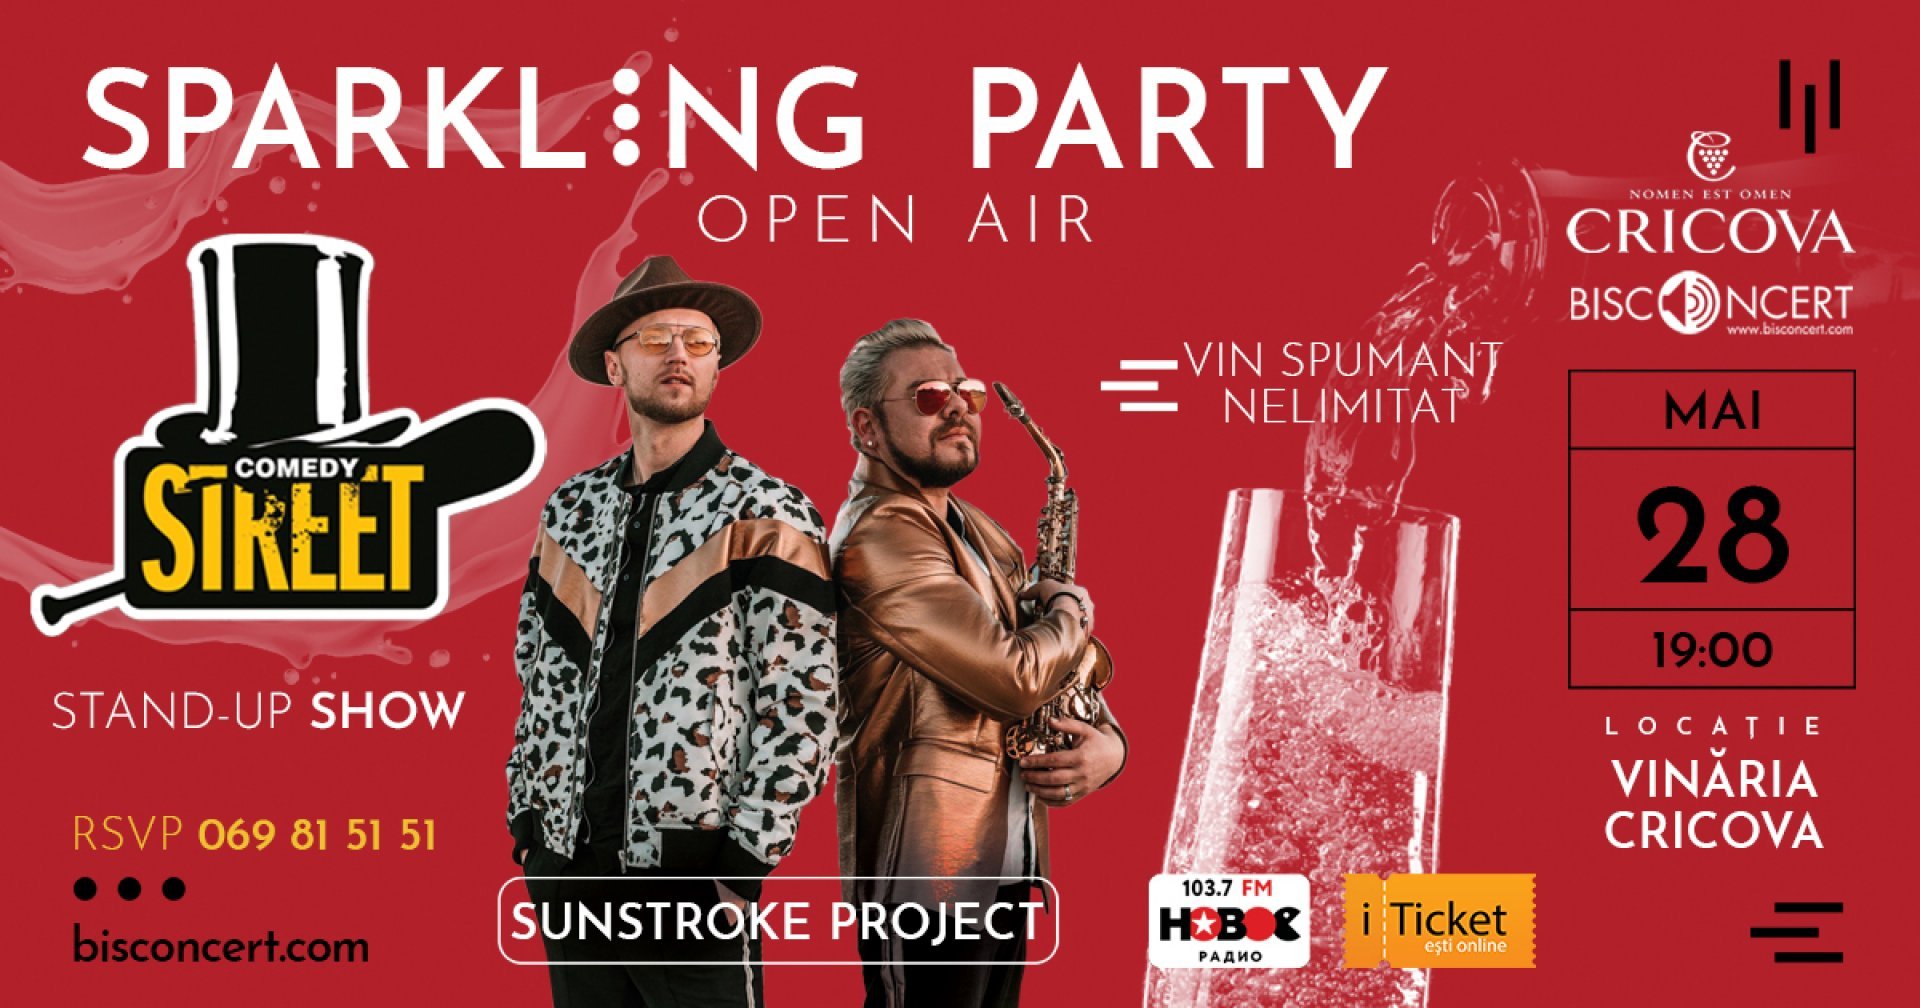 Sparkling Party вместе с Stand-Up Show от Comedy Street и SunStroke Project